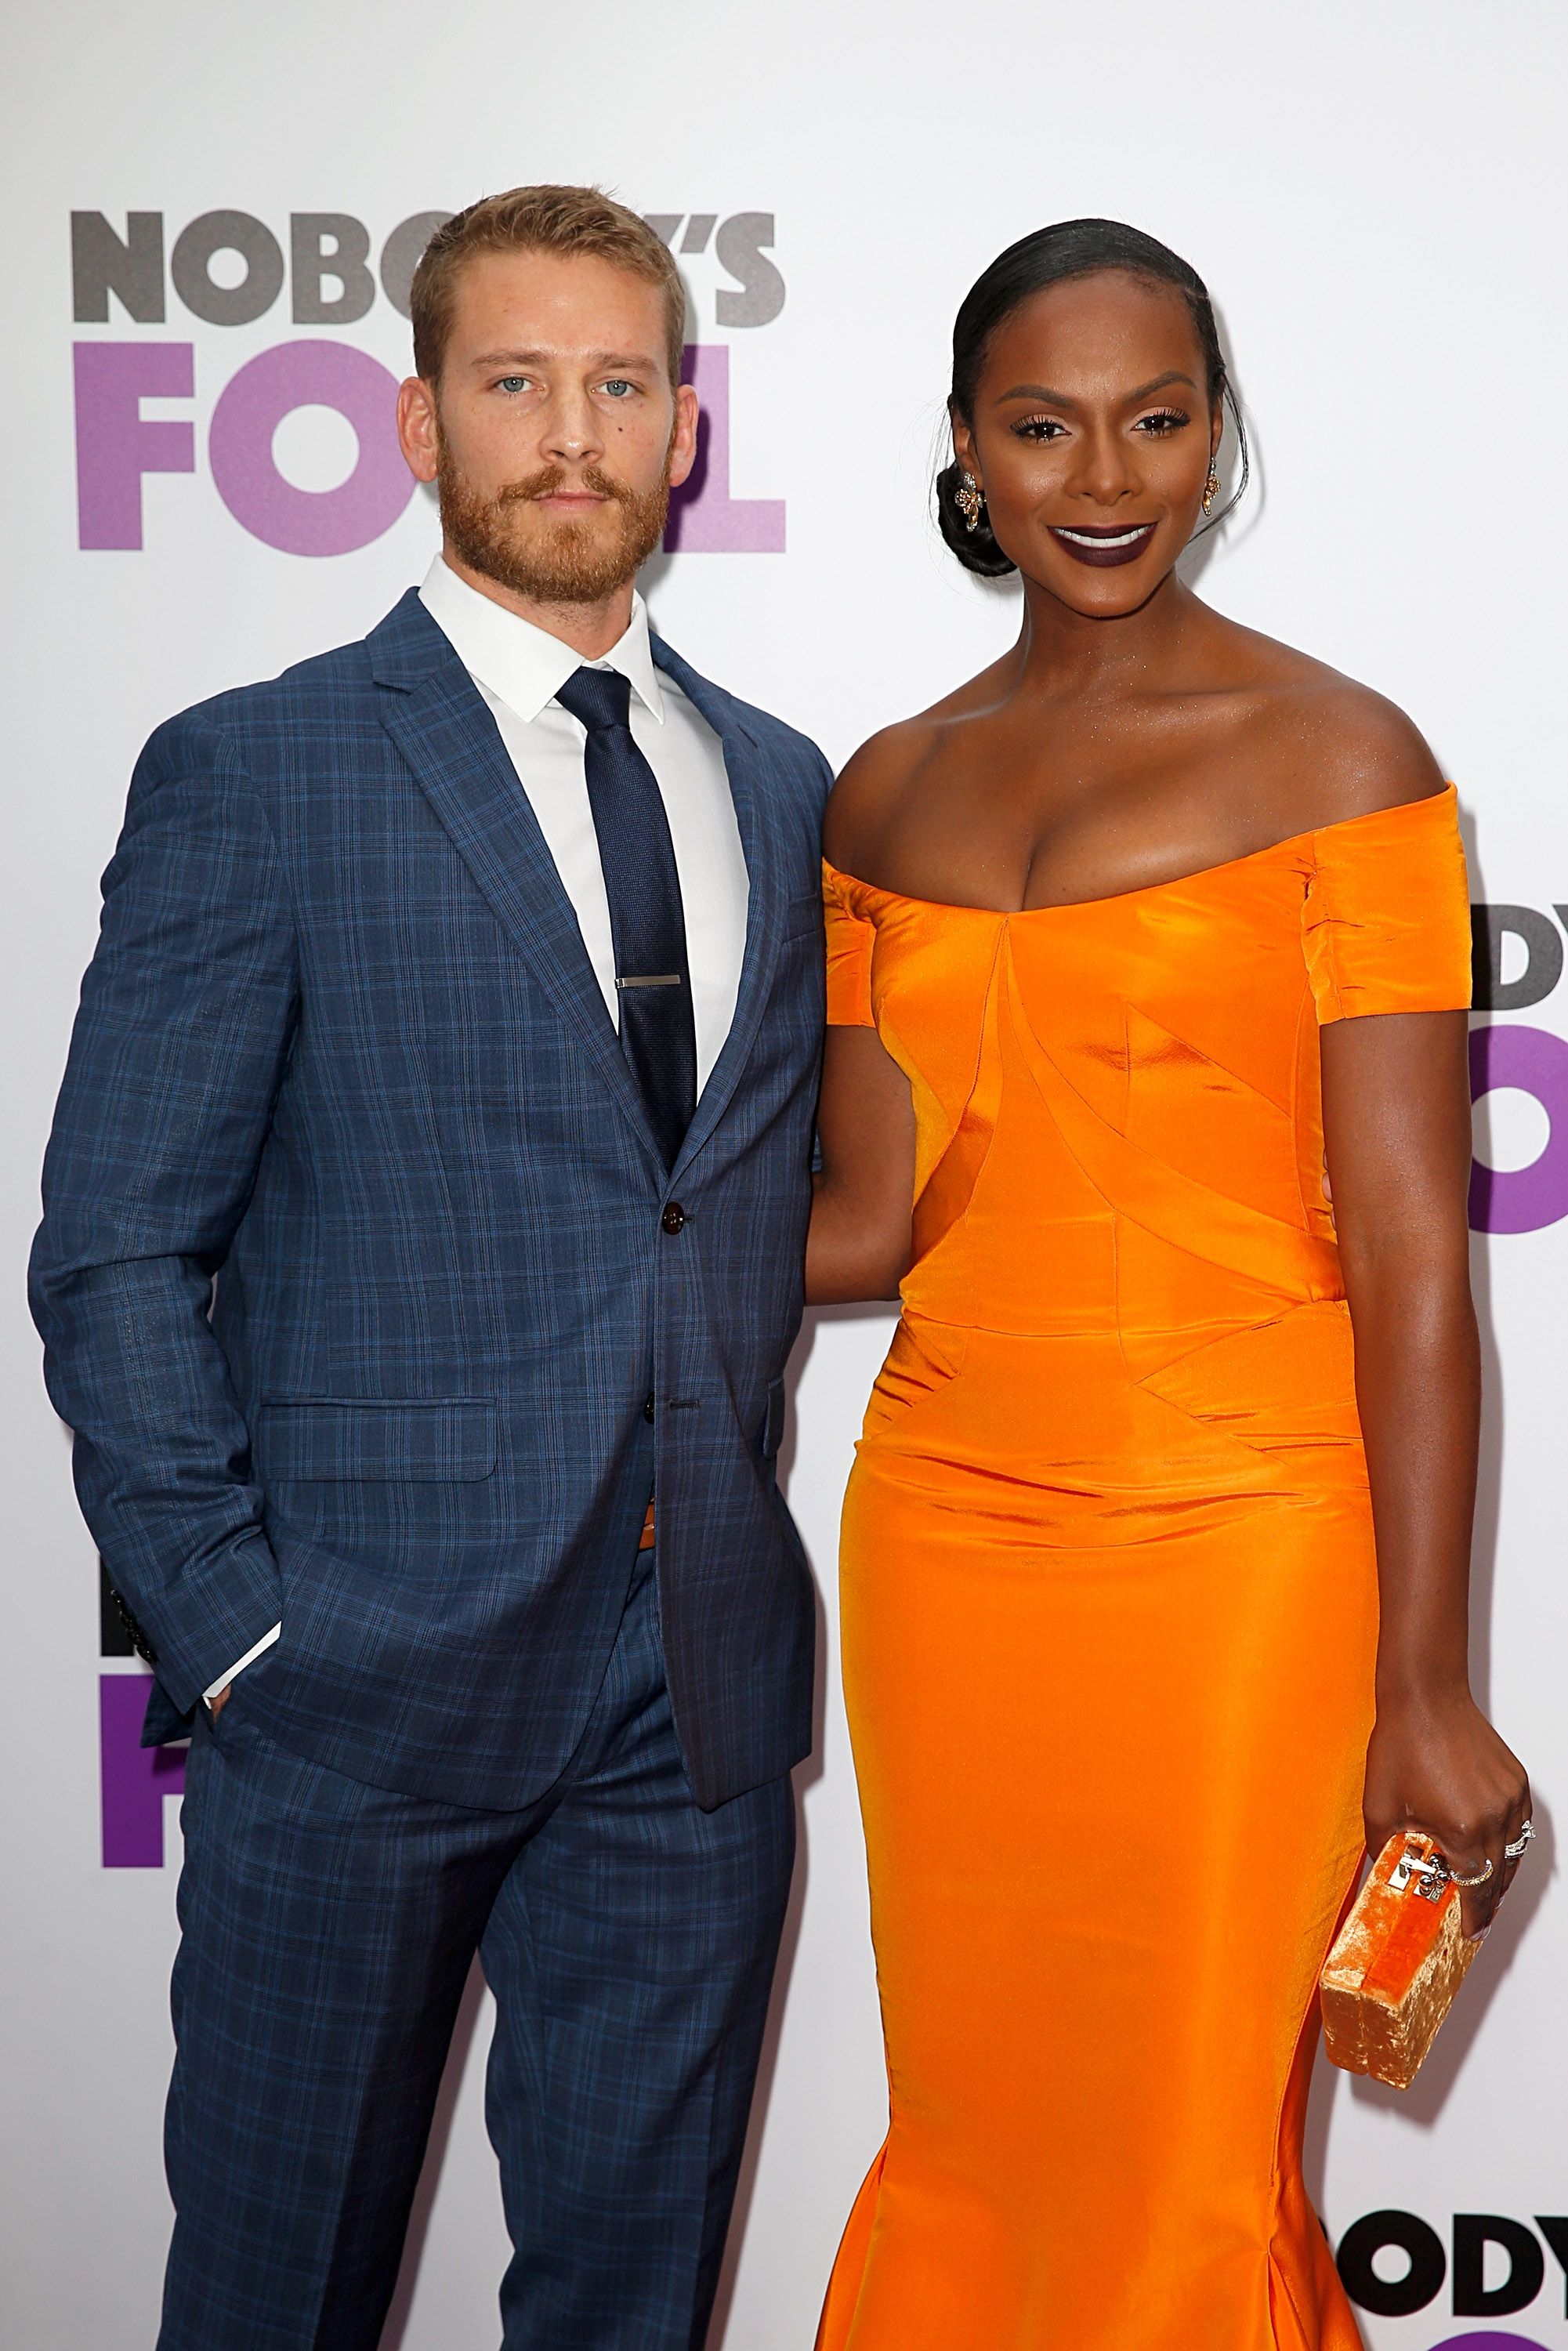 Nicholas James and Tika Sumpter during the premiere of "Nobody's Fool" on October 28, 2018 in New York City. | Source: Getty Images